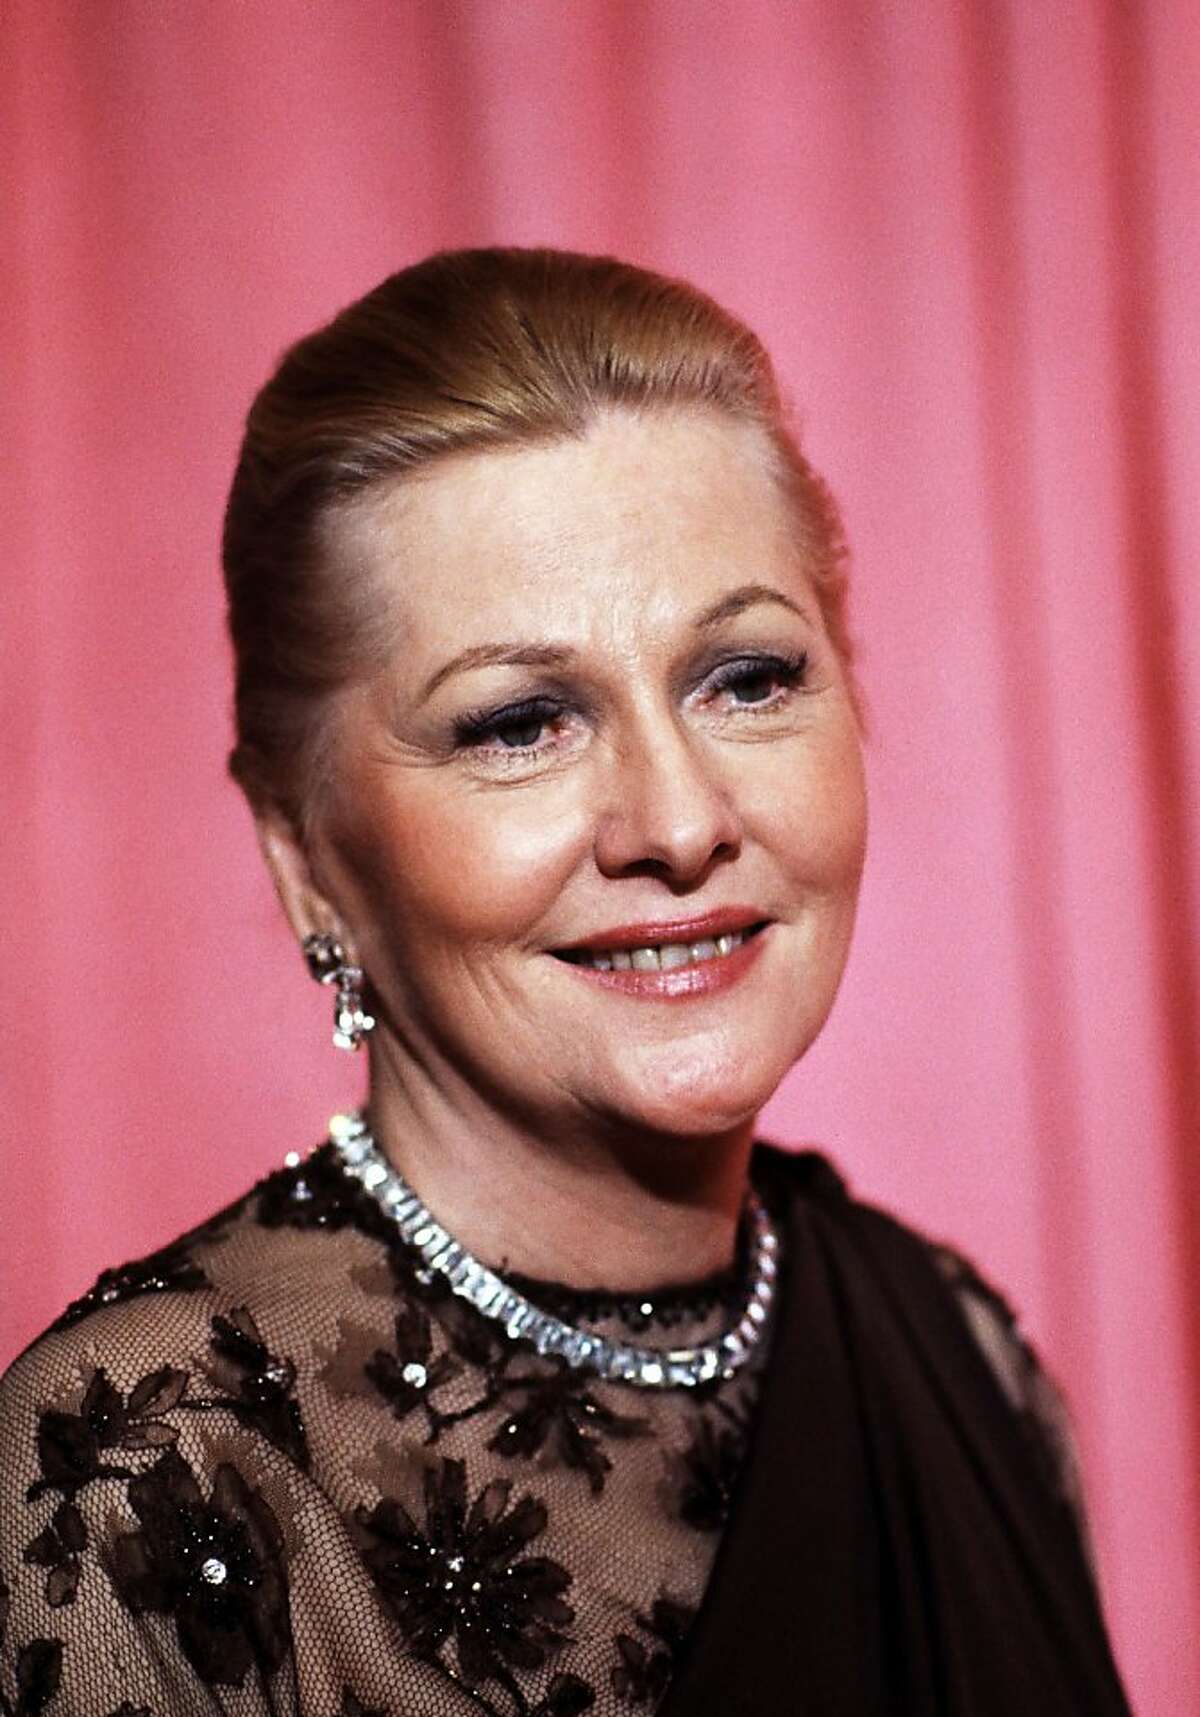 File- This April 3, 1978 file photo shows actress Joan Fontaine at the 50th Annual Academy Awards in Los Angeles. The Oscar-winning actres has died at the age of 96. Longtime friend Noel Beutel says she died in her sleep in her Carmel home Sunday, Dec. 15, 2013. (AP Photo/File)